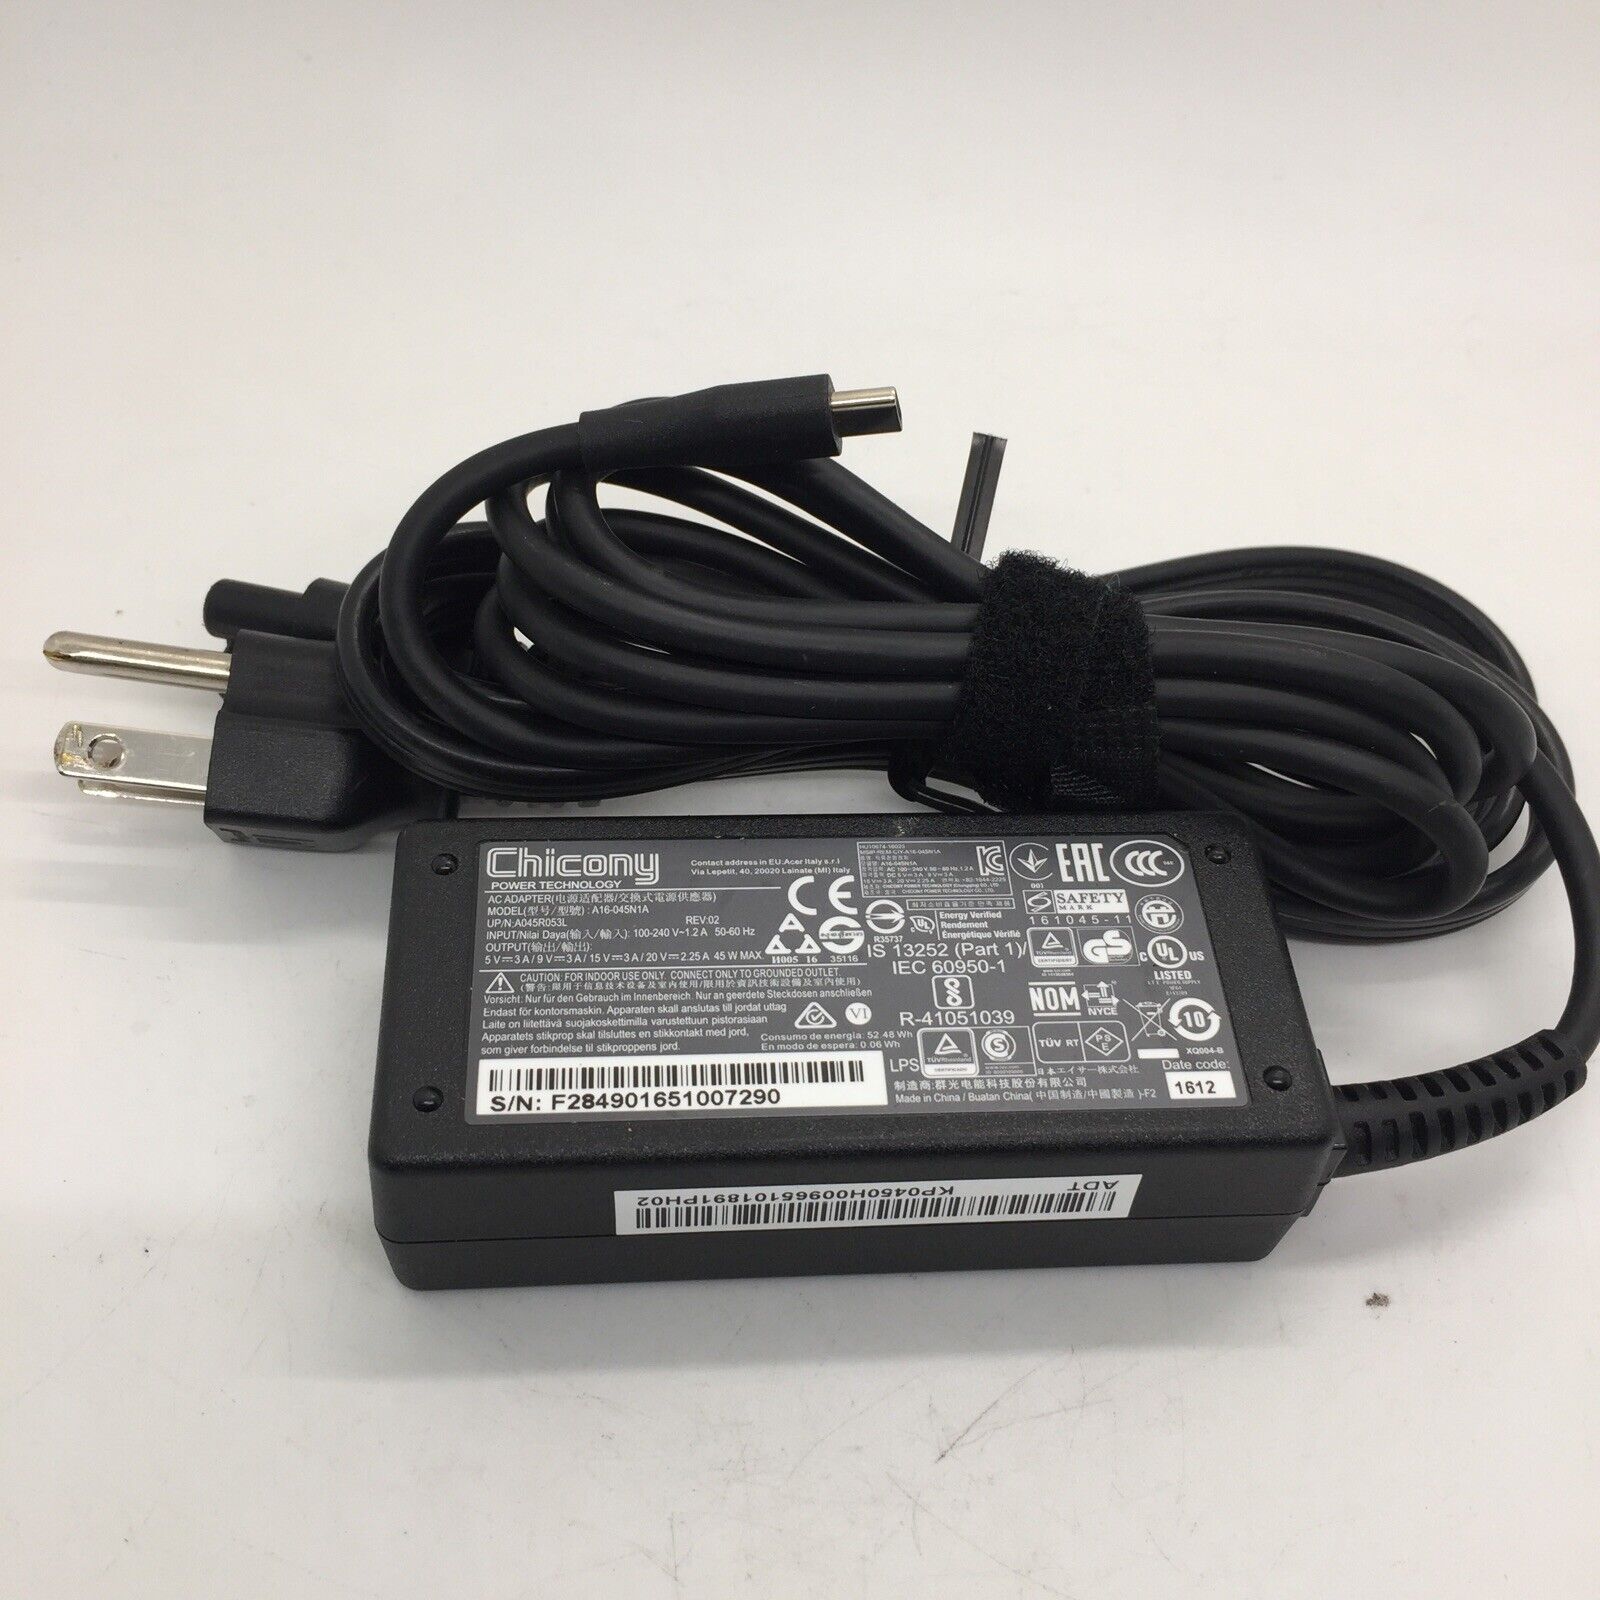 *Brand NEW*Original Chicony Chromebook A16-045N1A 45W USB-C AC Power Adapter Charger - Click Image to Close